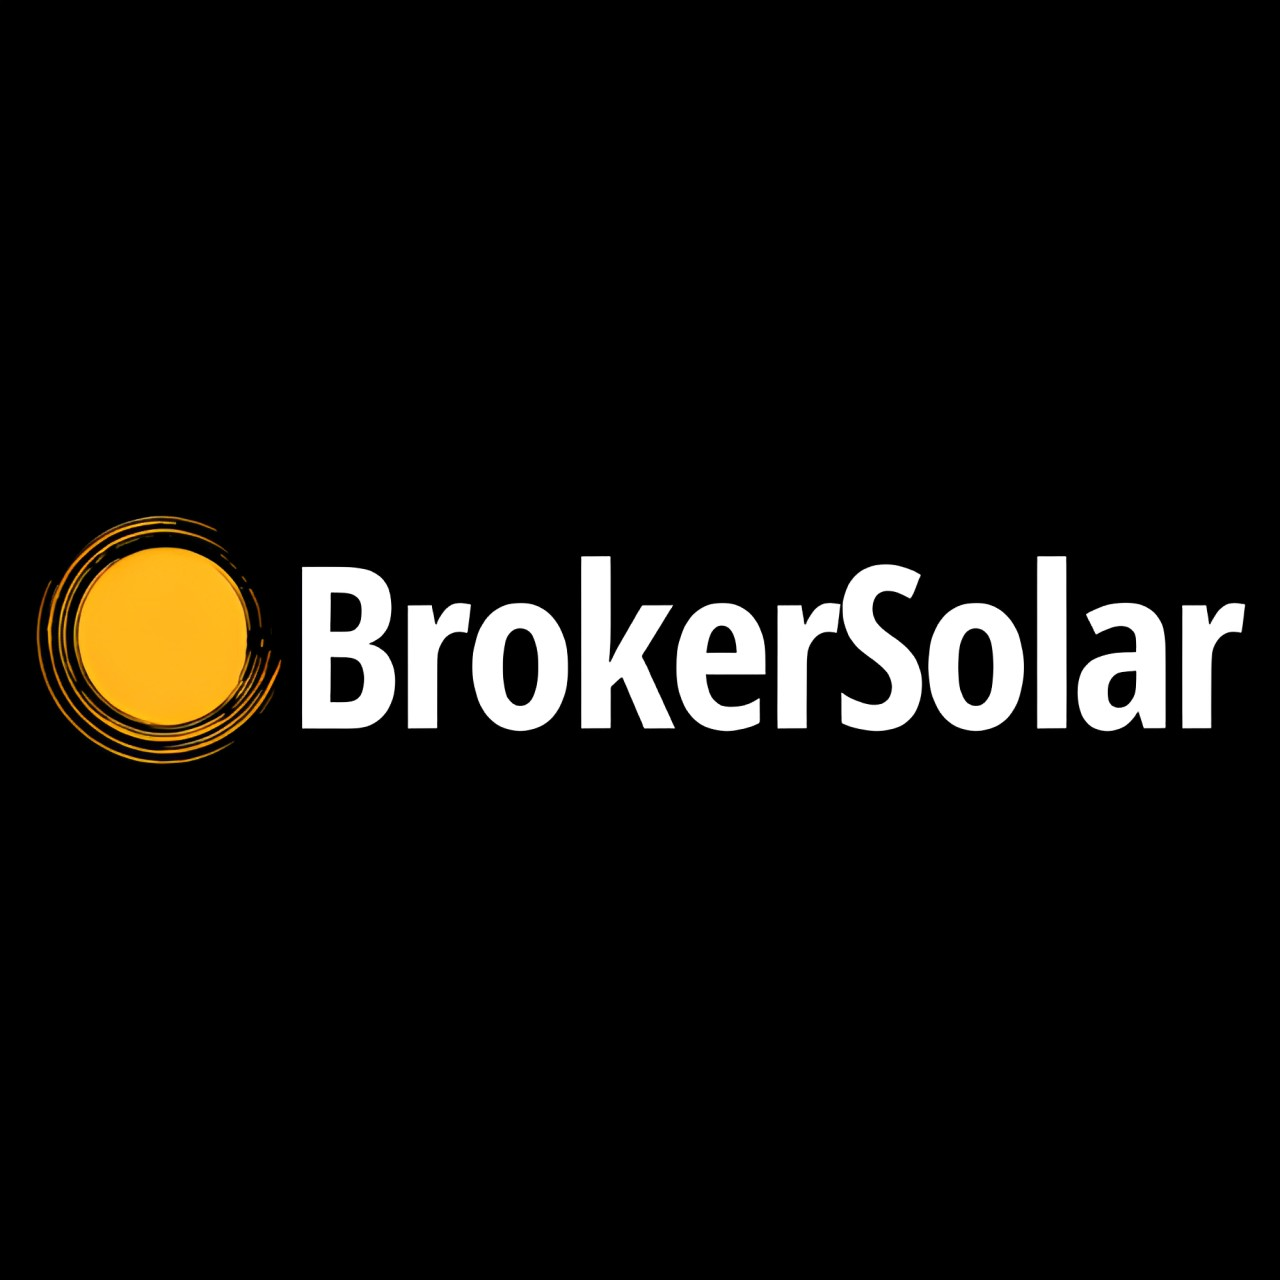 Broker Solar specializes in efficient and reliable solar panel removal services.